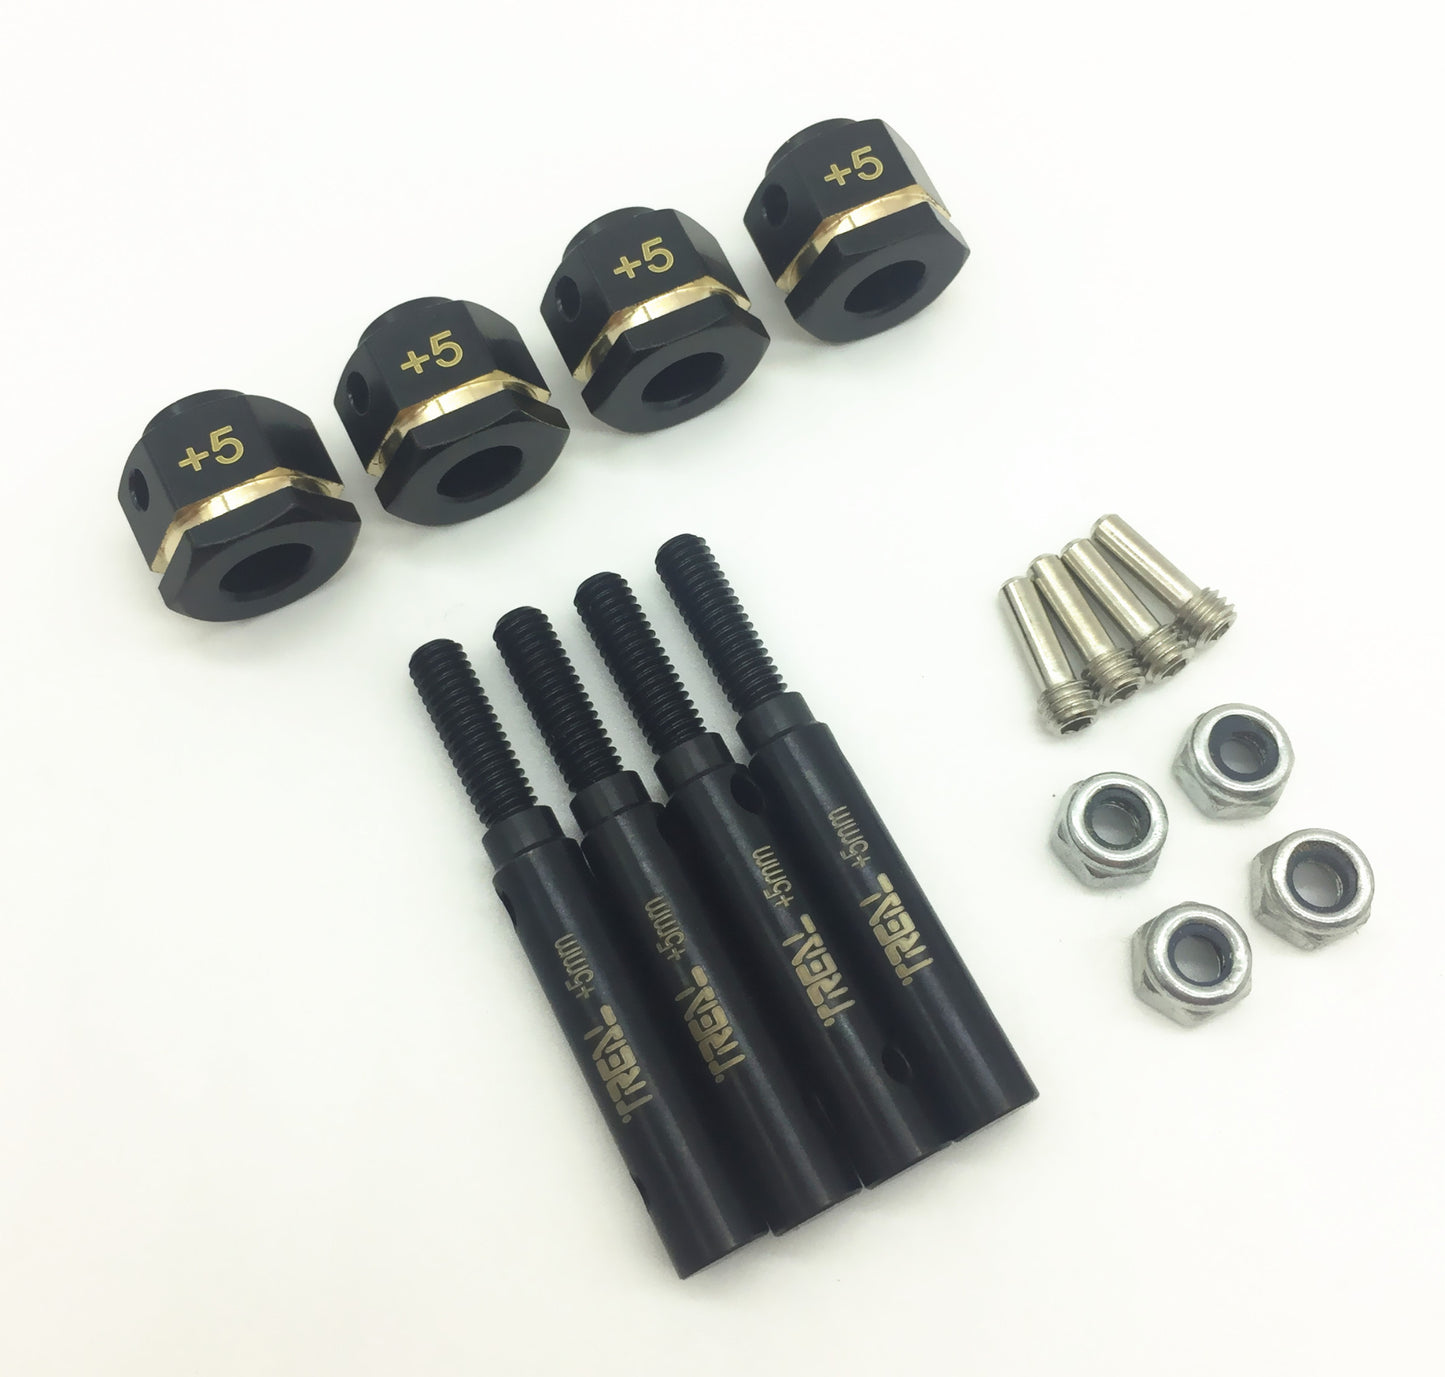 Treal Brass Extended Wheel Hubs Hex Pins +5 and Steel Stub Axle (Portal Drive) Extended +5mm Set for TRX-4 Defender